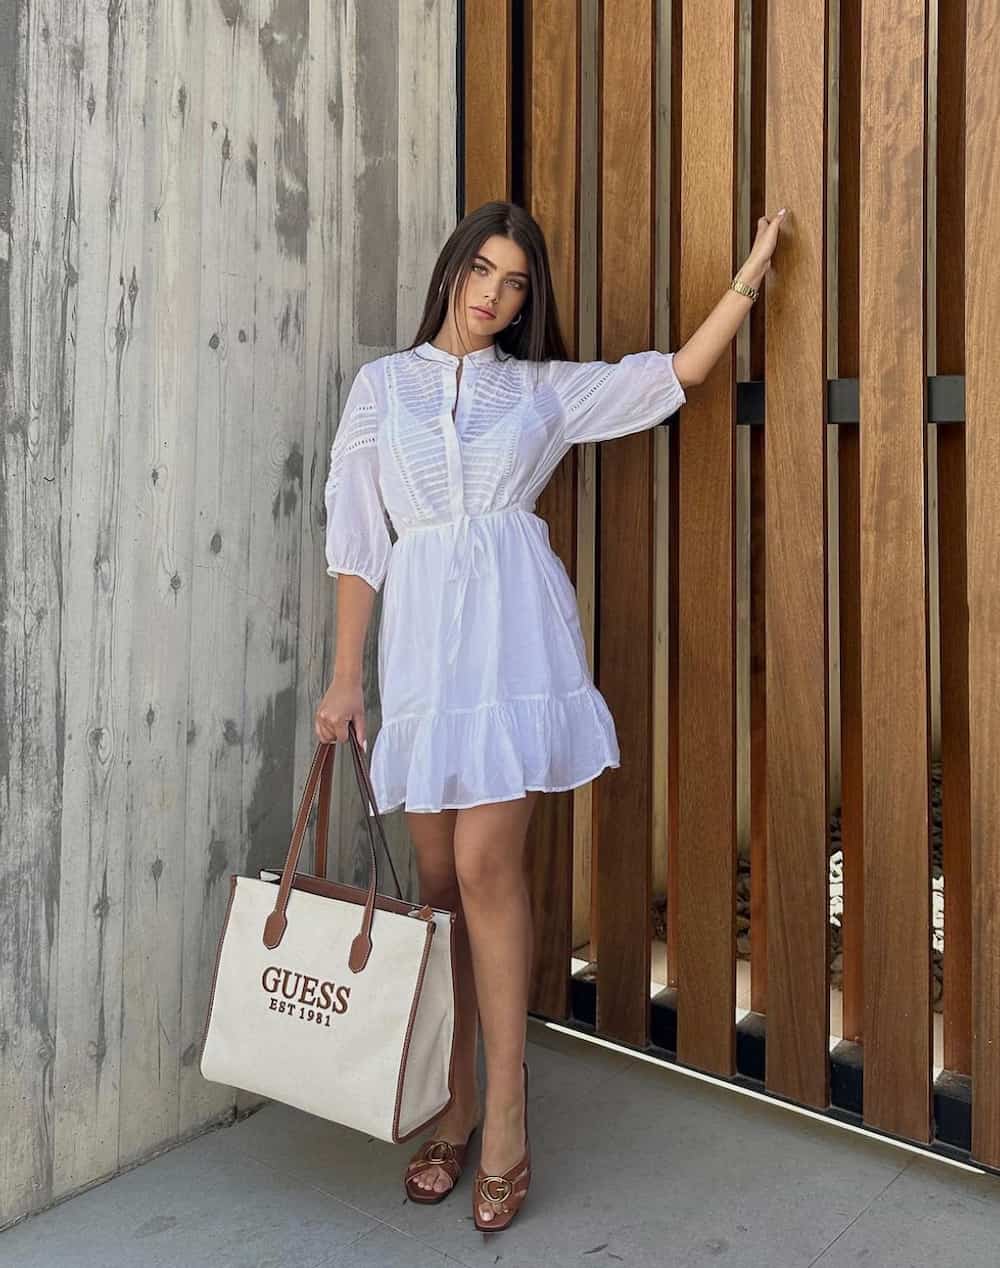 A woman holding a white canvas and brown leather Guess tote while wearing a white summery dress and brown sandals